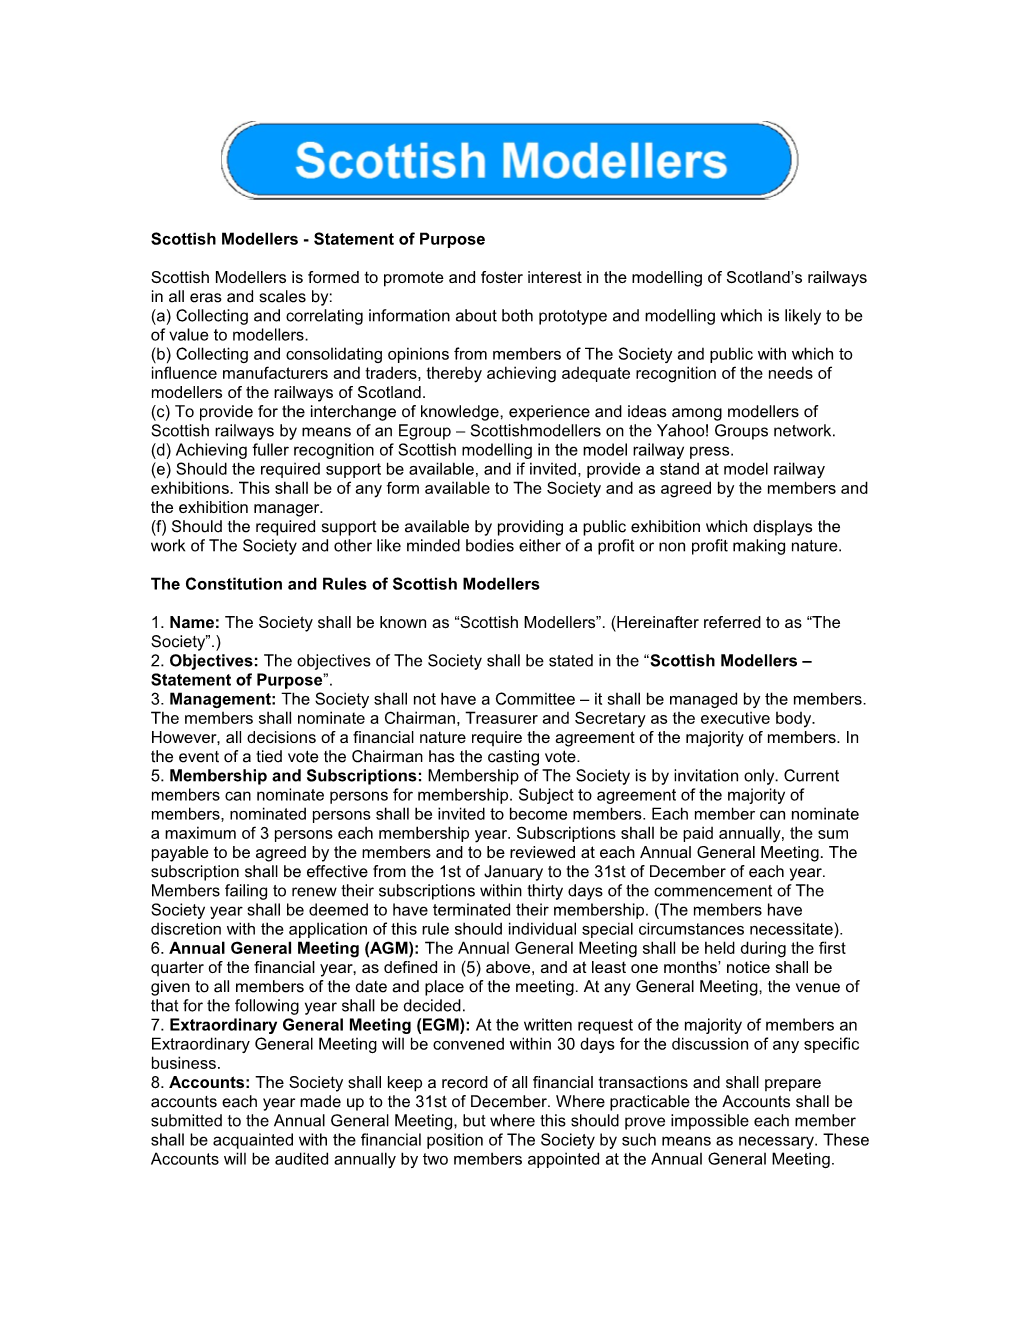 The Constitution and Rules of Diesel and Electric Modellers United